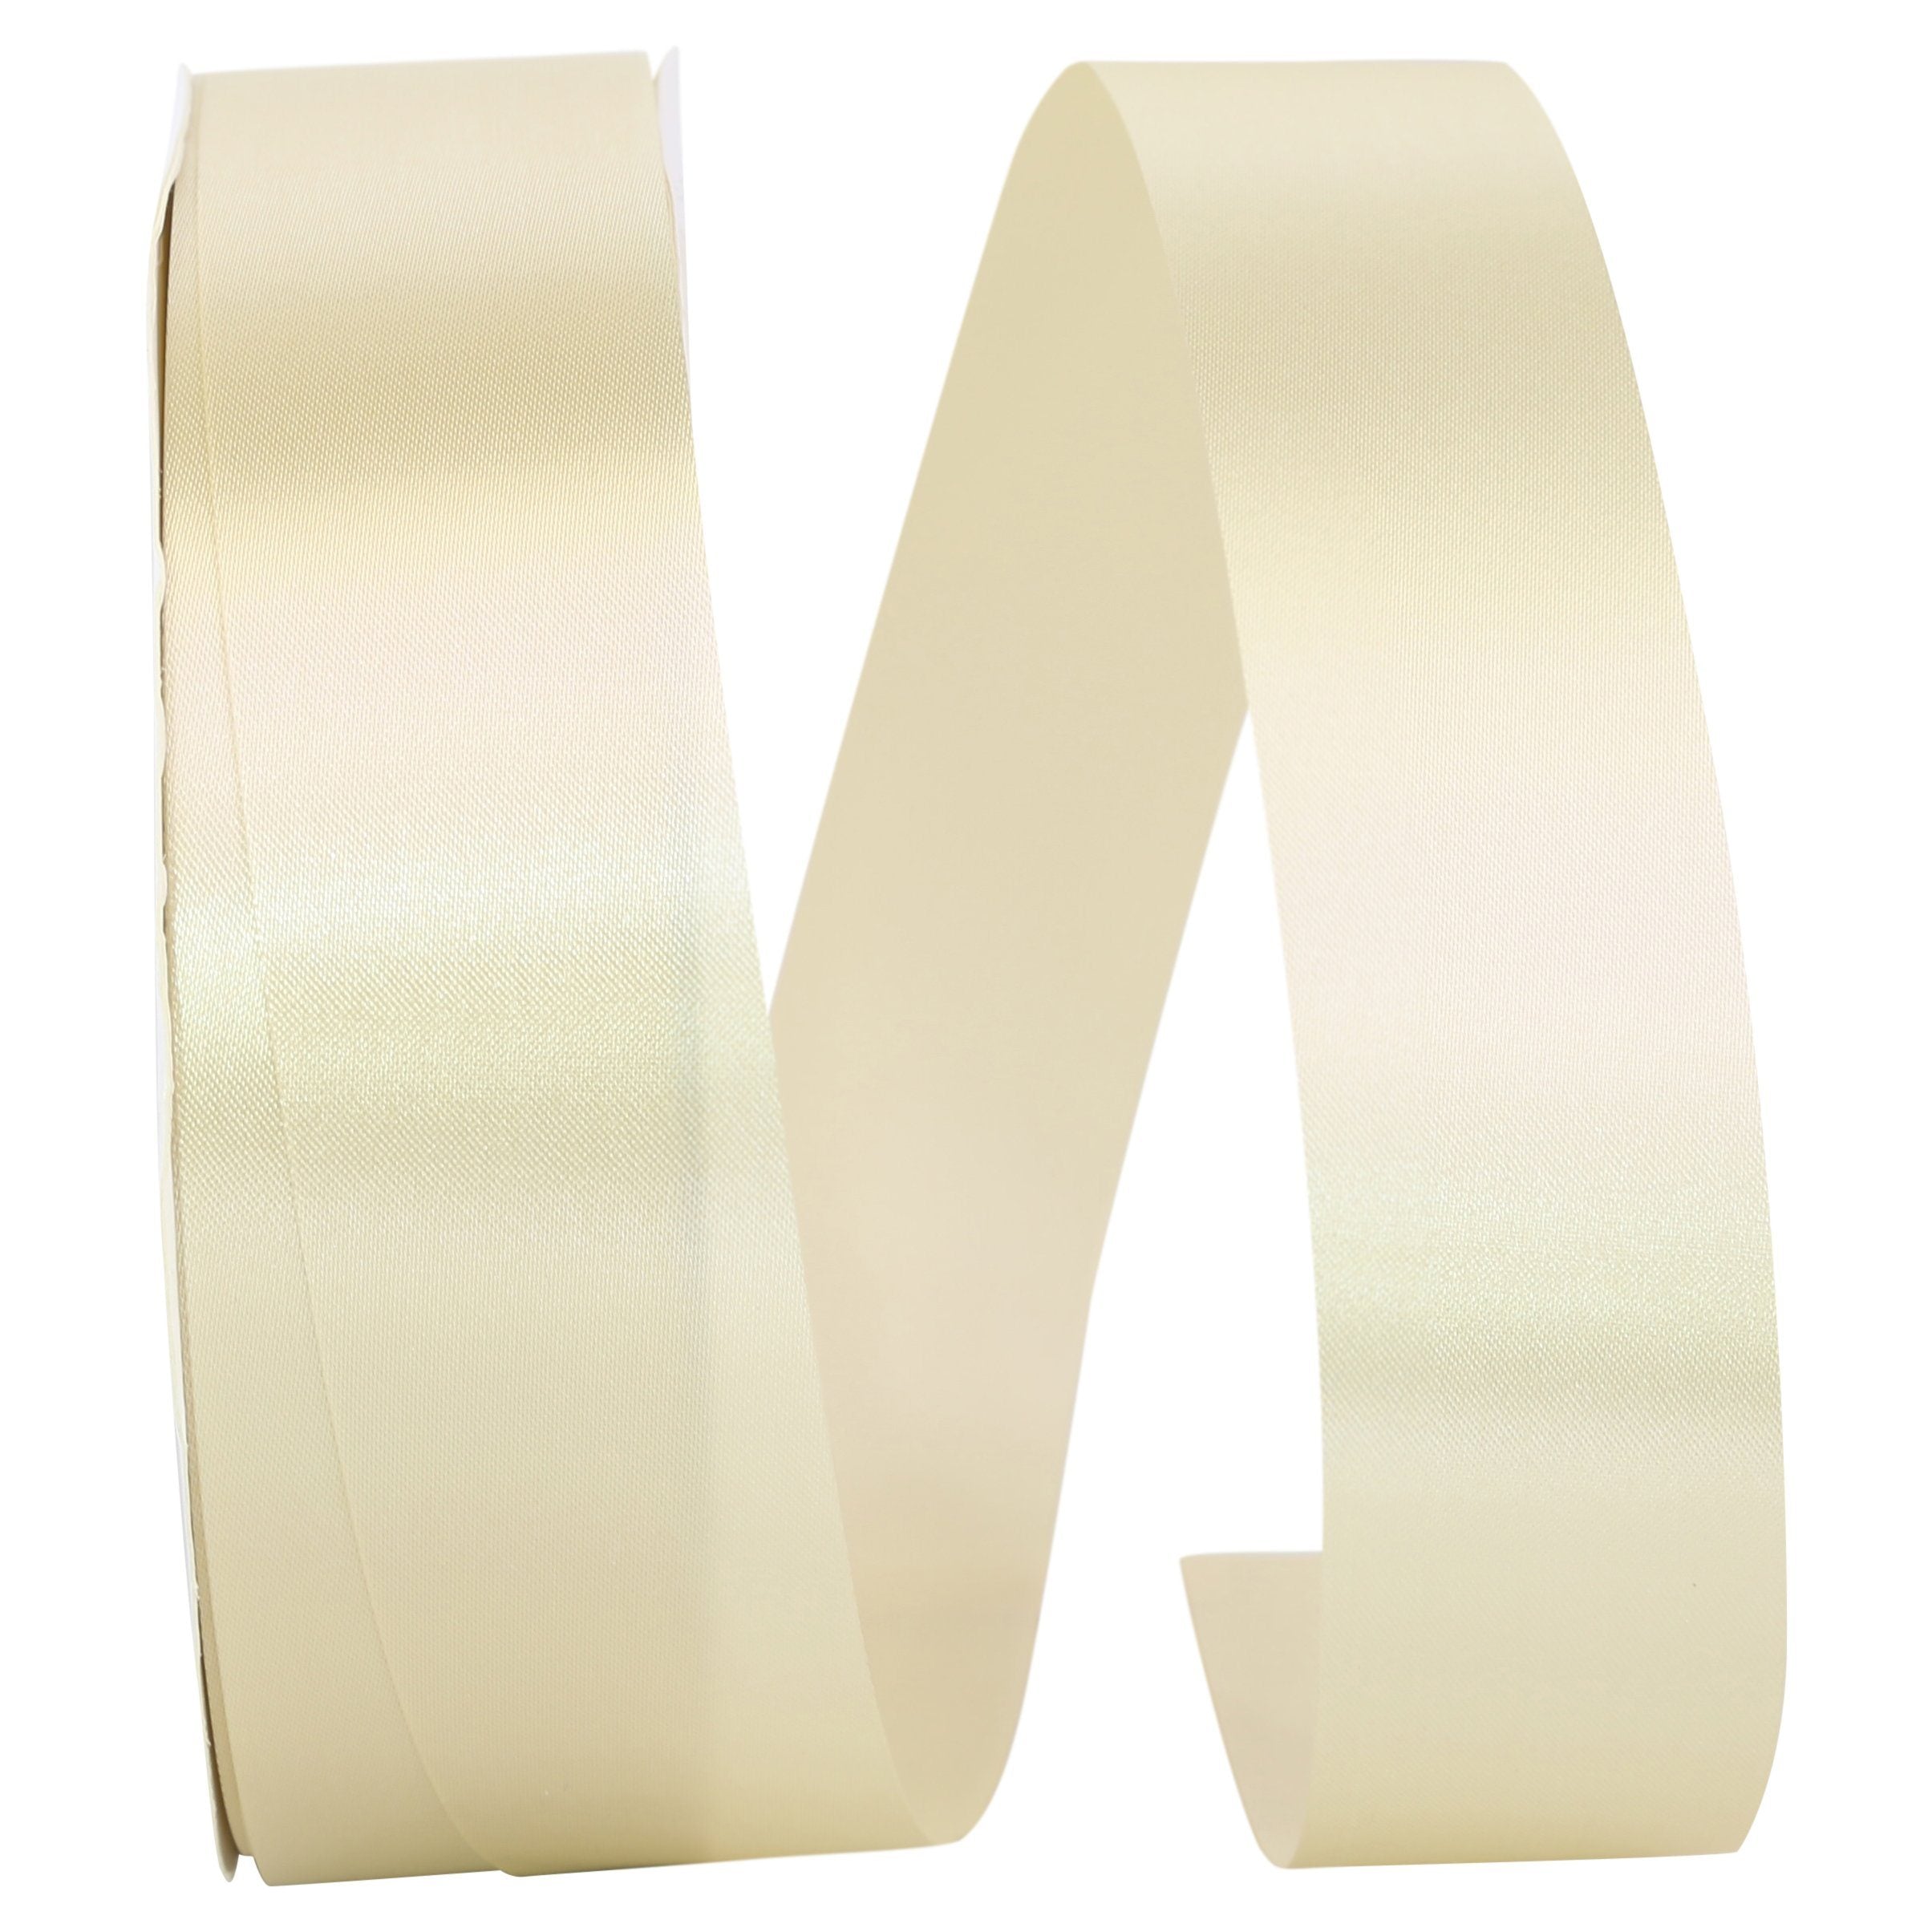 Ivory Cream Allure 1 3/8 inch x 100 Yards Satin Ribbon - by Jam Paper